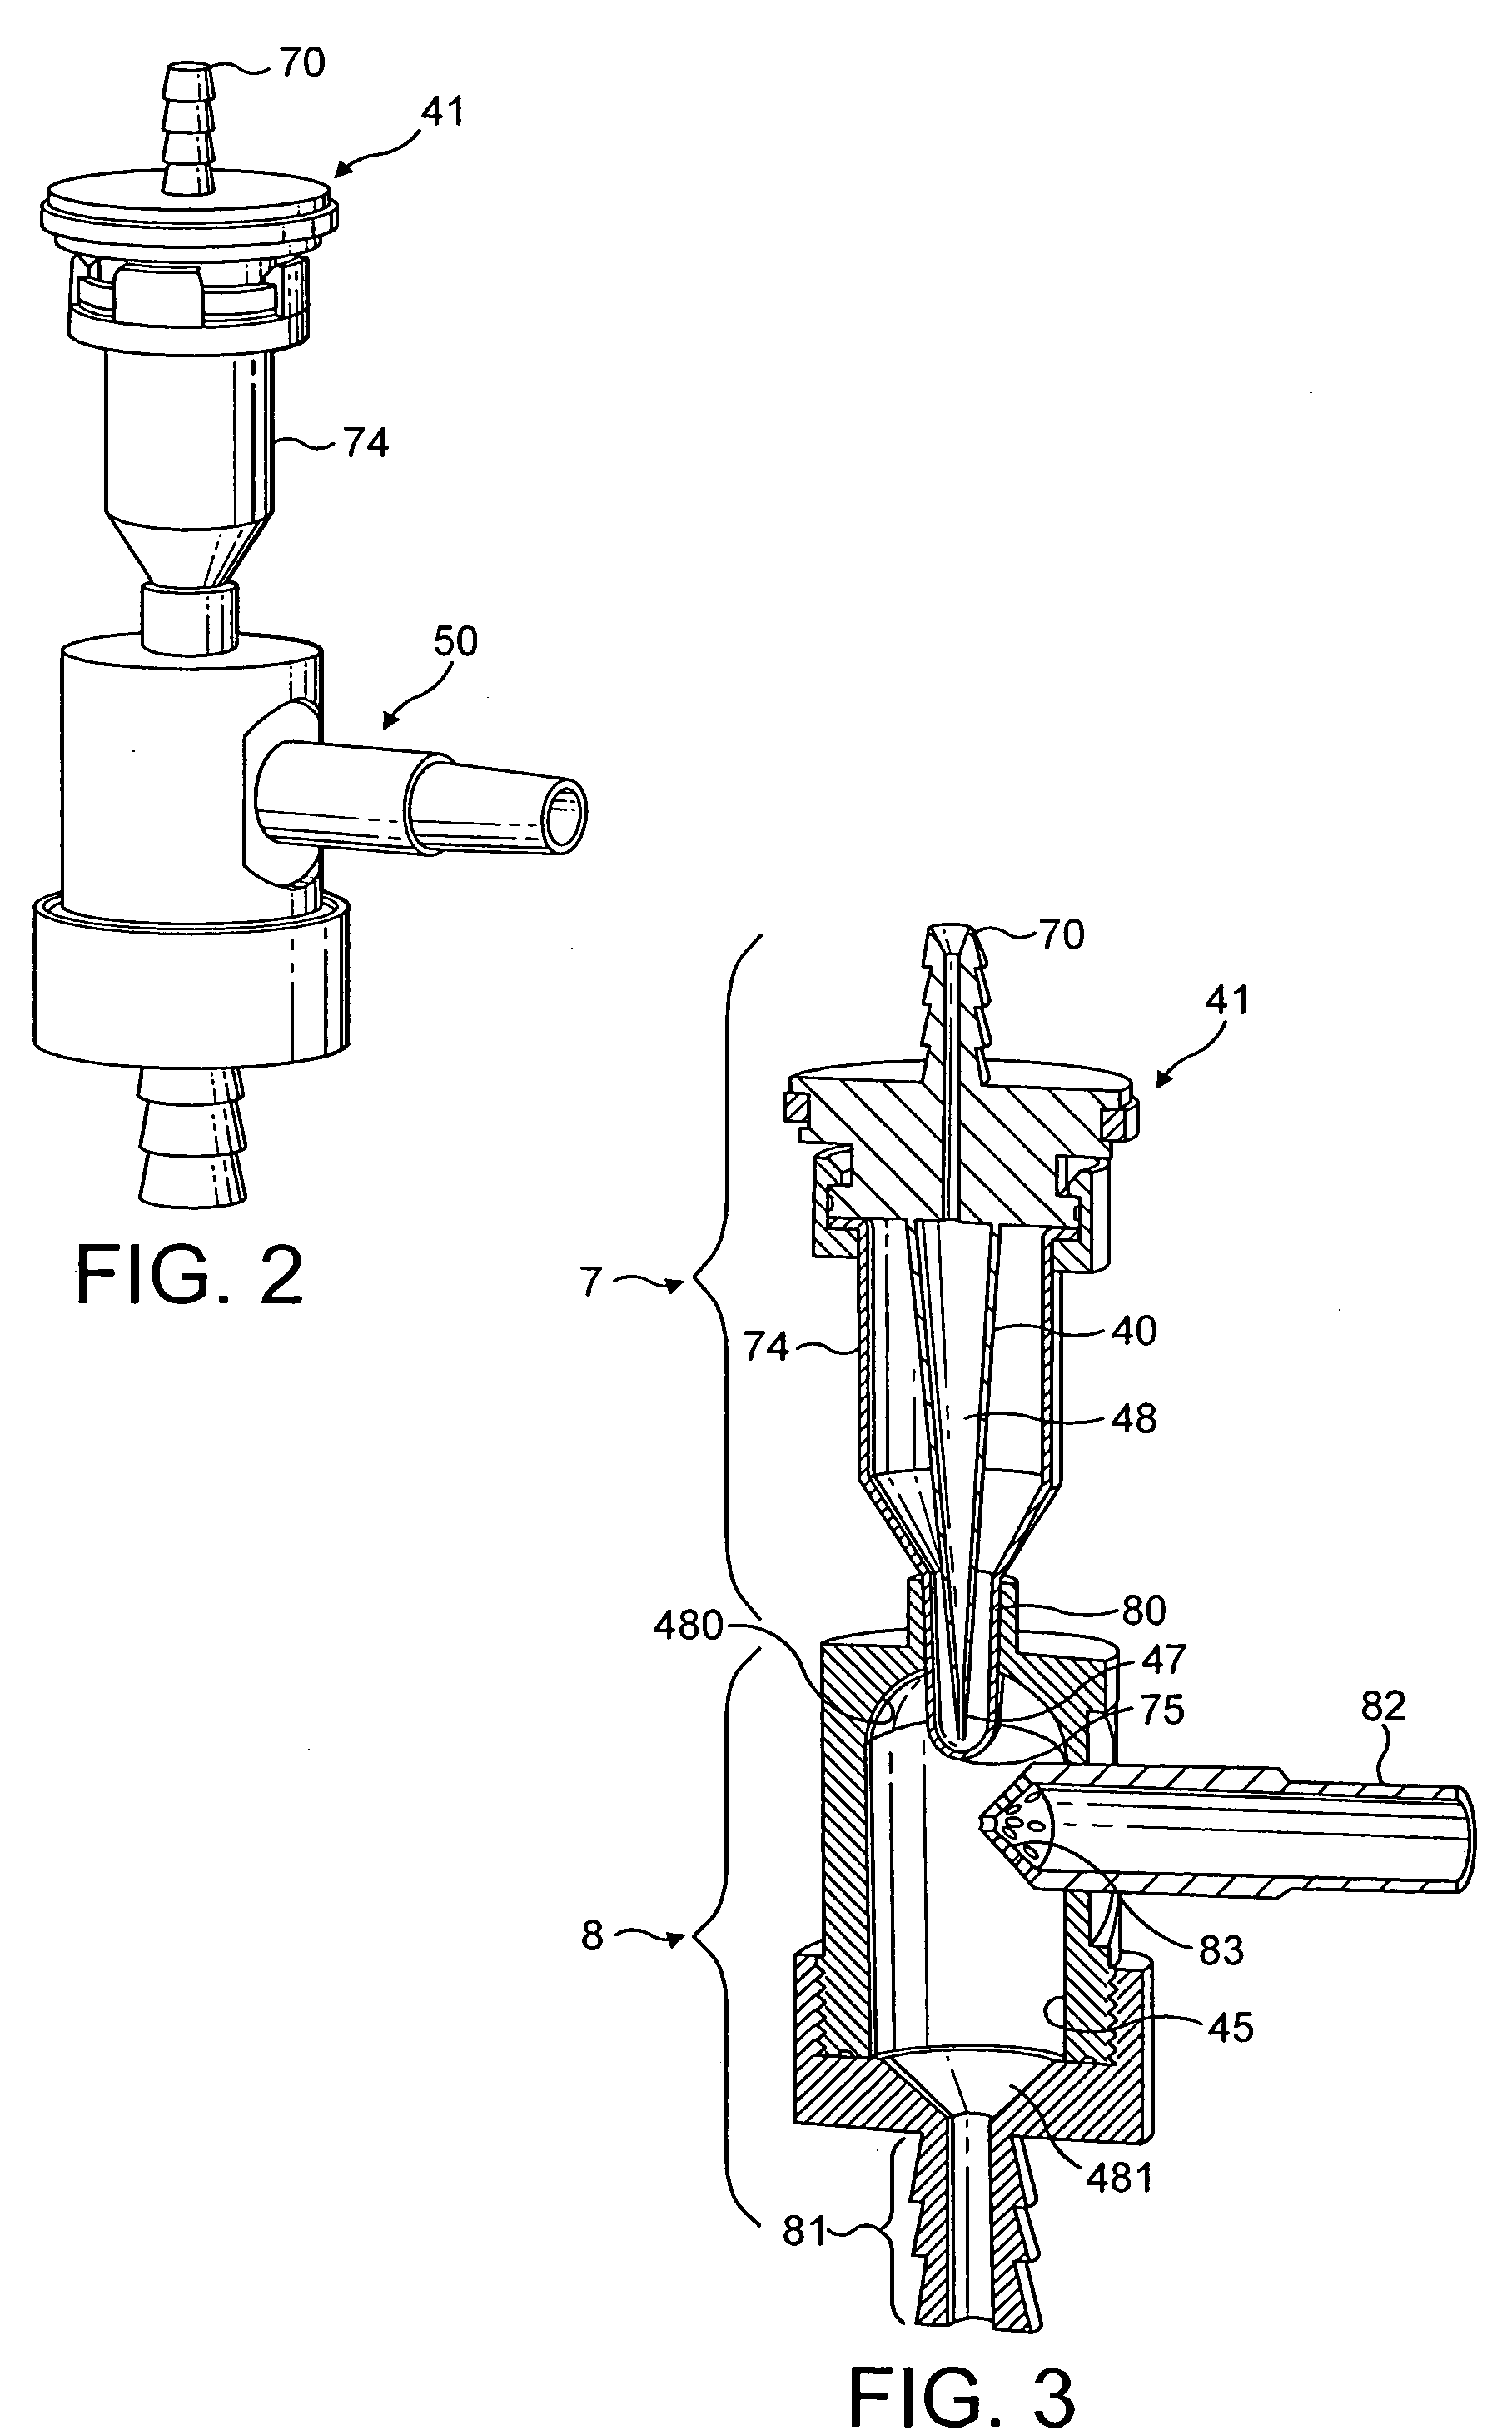 Device and method for hygienically delivering a liquid food